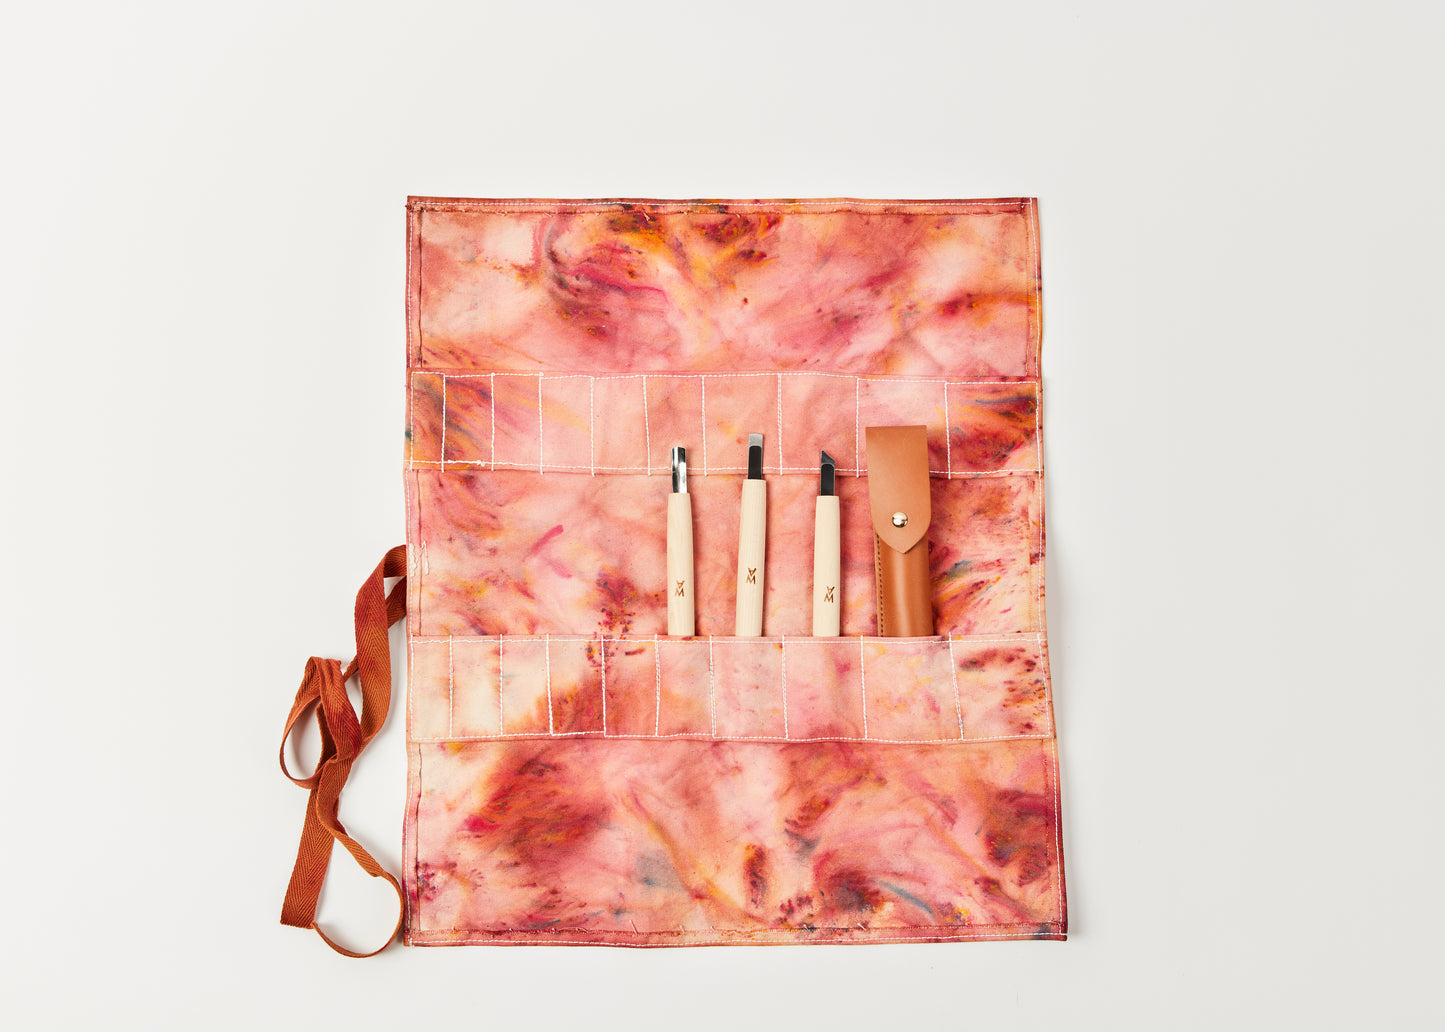 Crimson colored limited edition hand-dyed tool roll. Displayed open with carving tools | Melanie Abrantes Designs